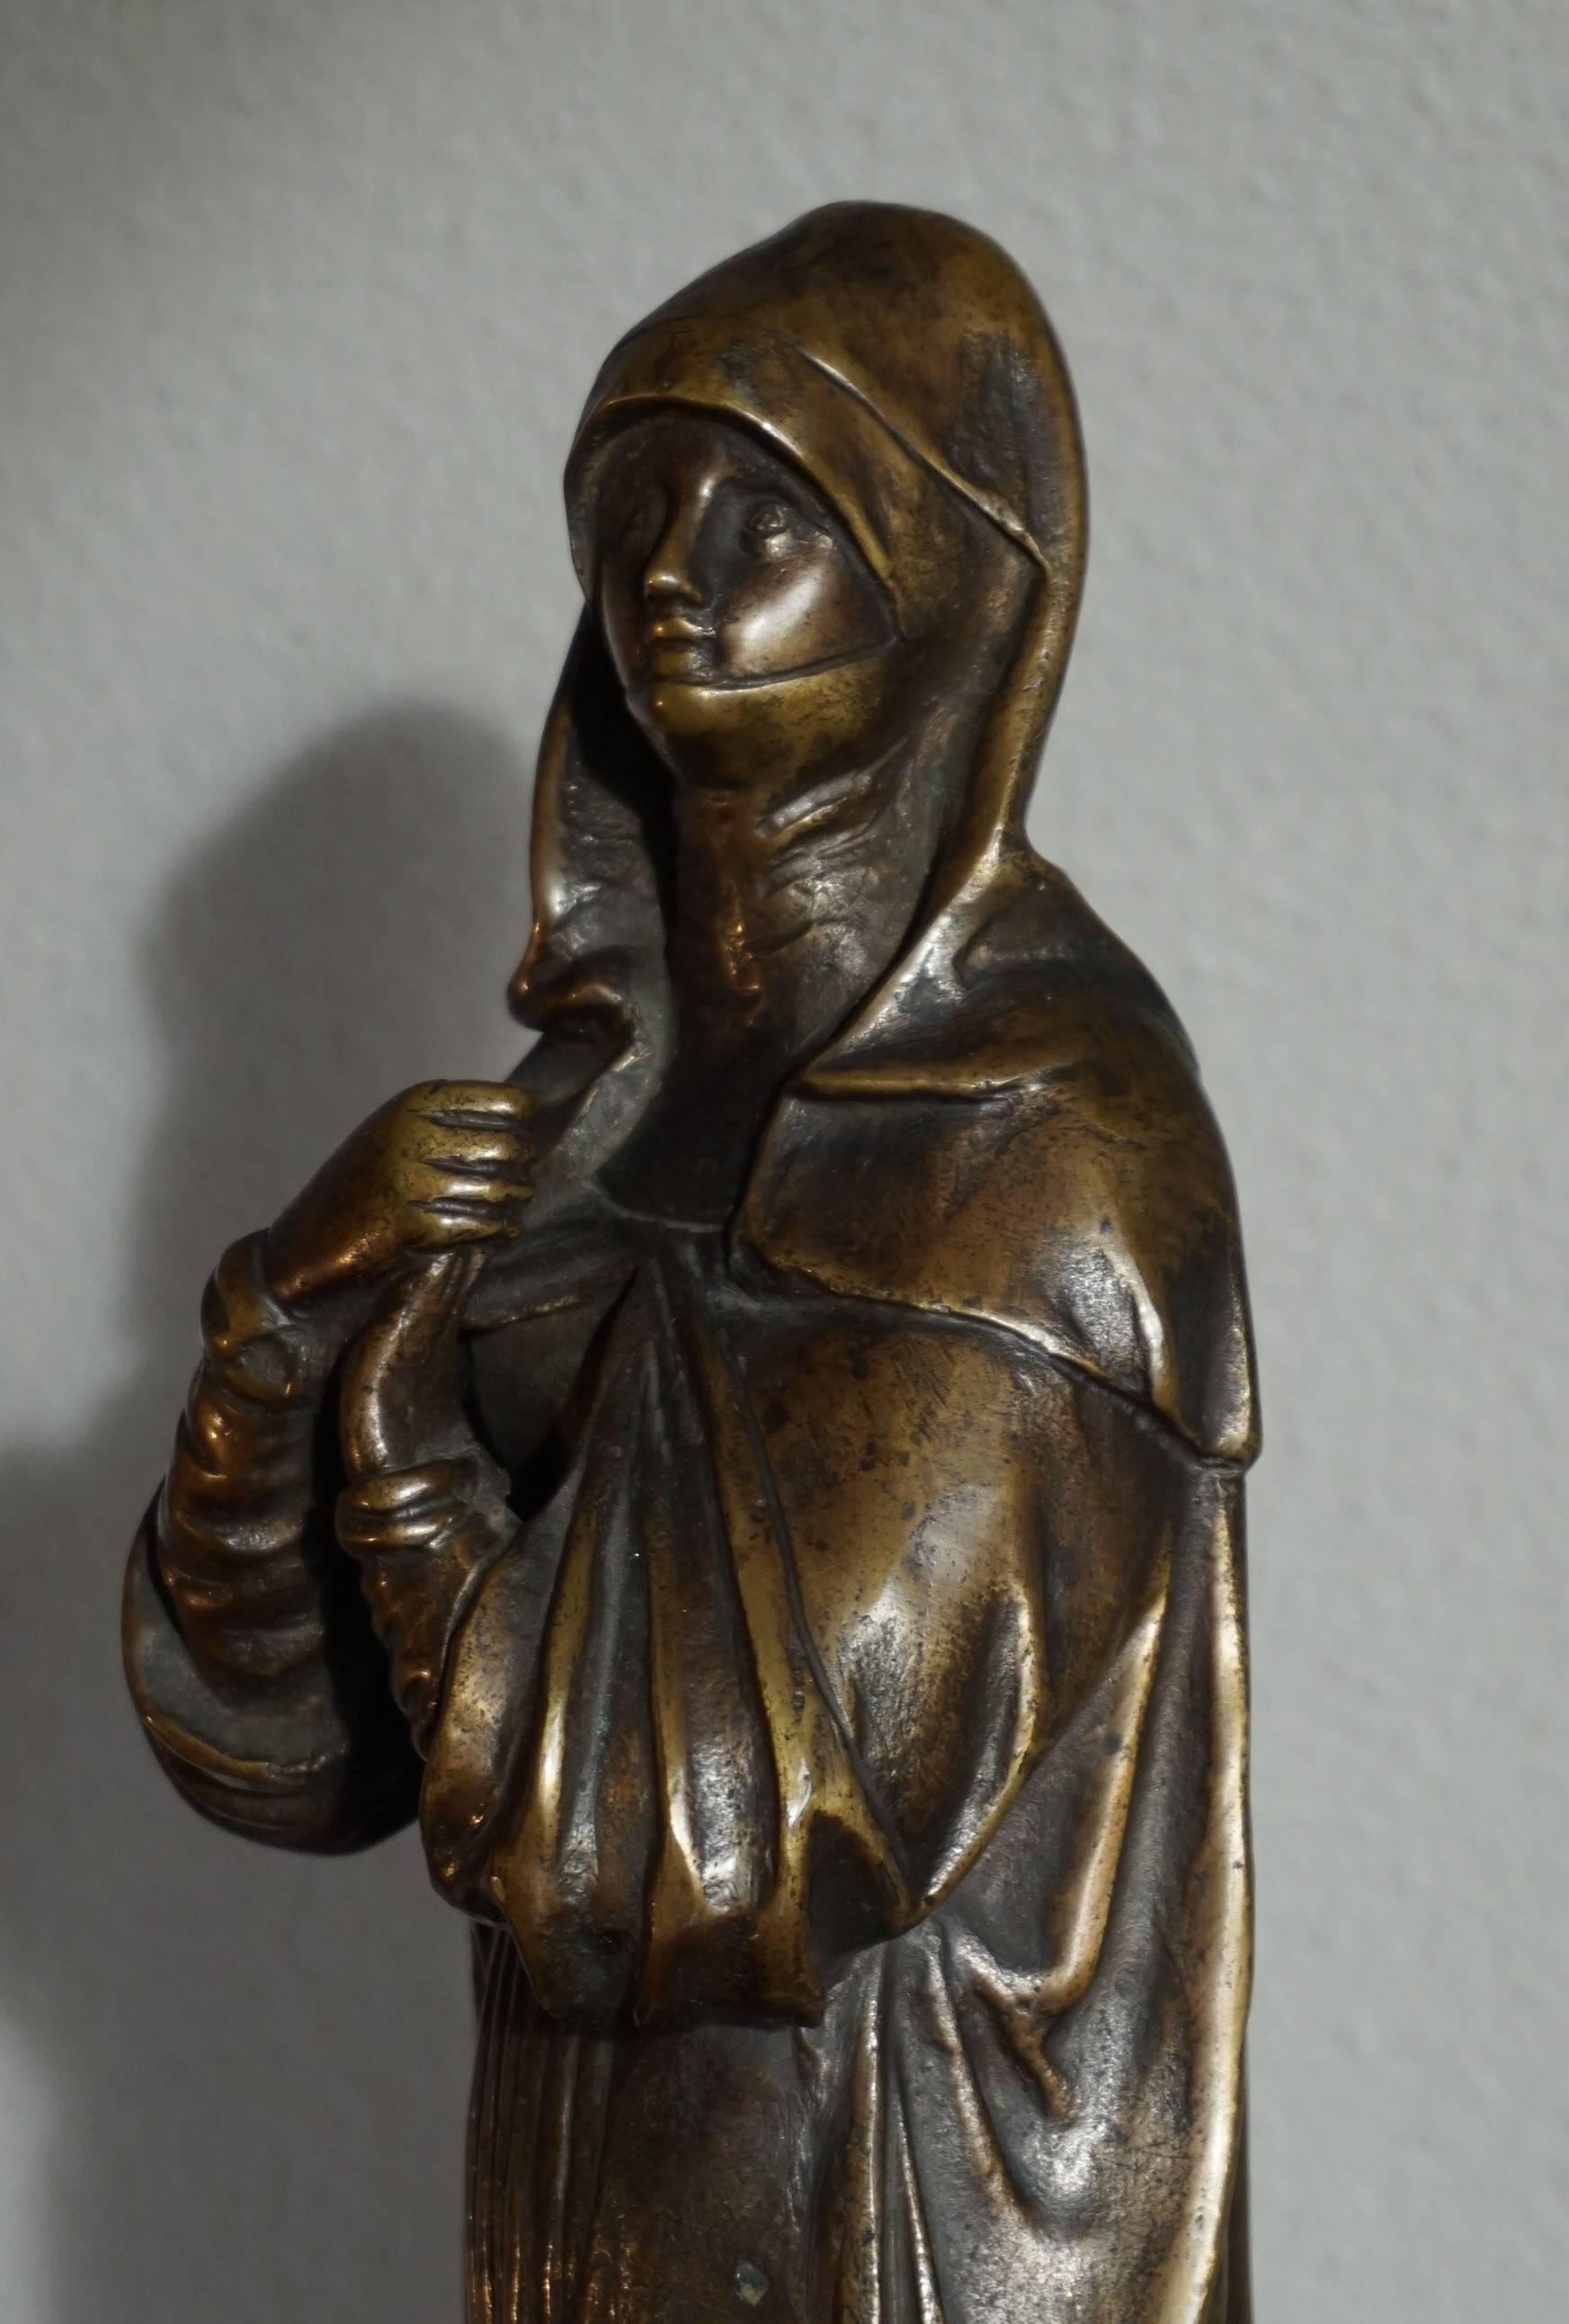 Religious work of art in beautiful bronze.

This religious work of art depicts a Saint Teresa (1515-1582) in a most devout stance. Teresa was a Spanish mystic, writer and reformer of the Carmelite order. She was an influential and pivotal figure of